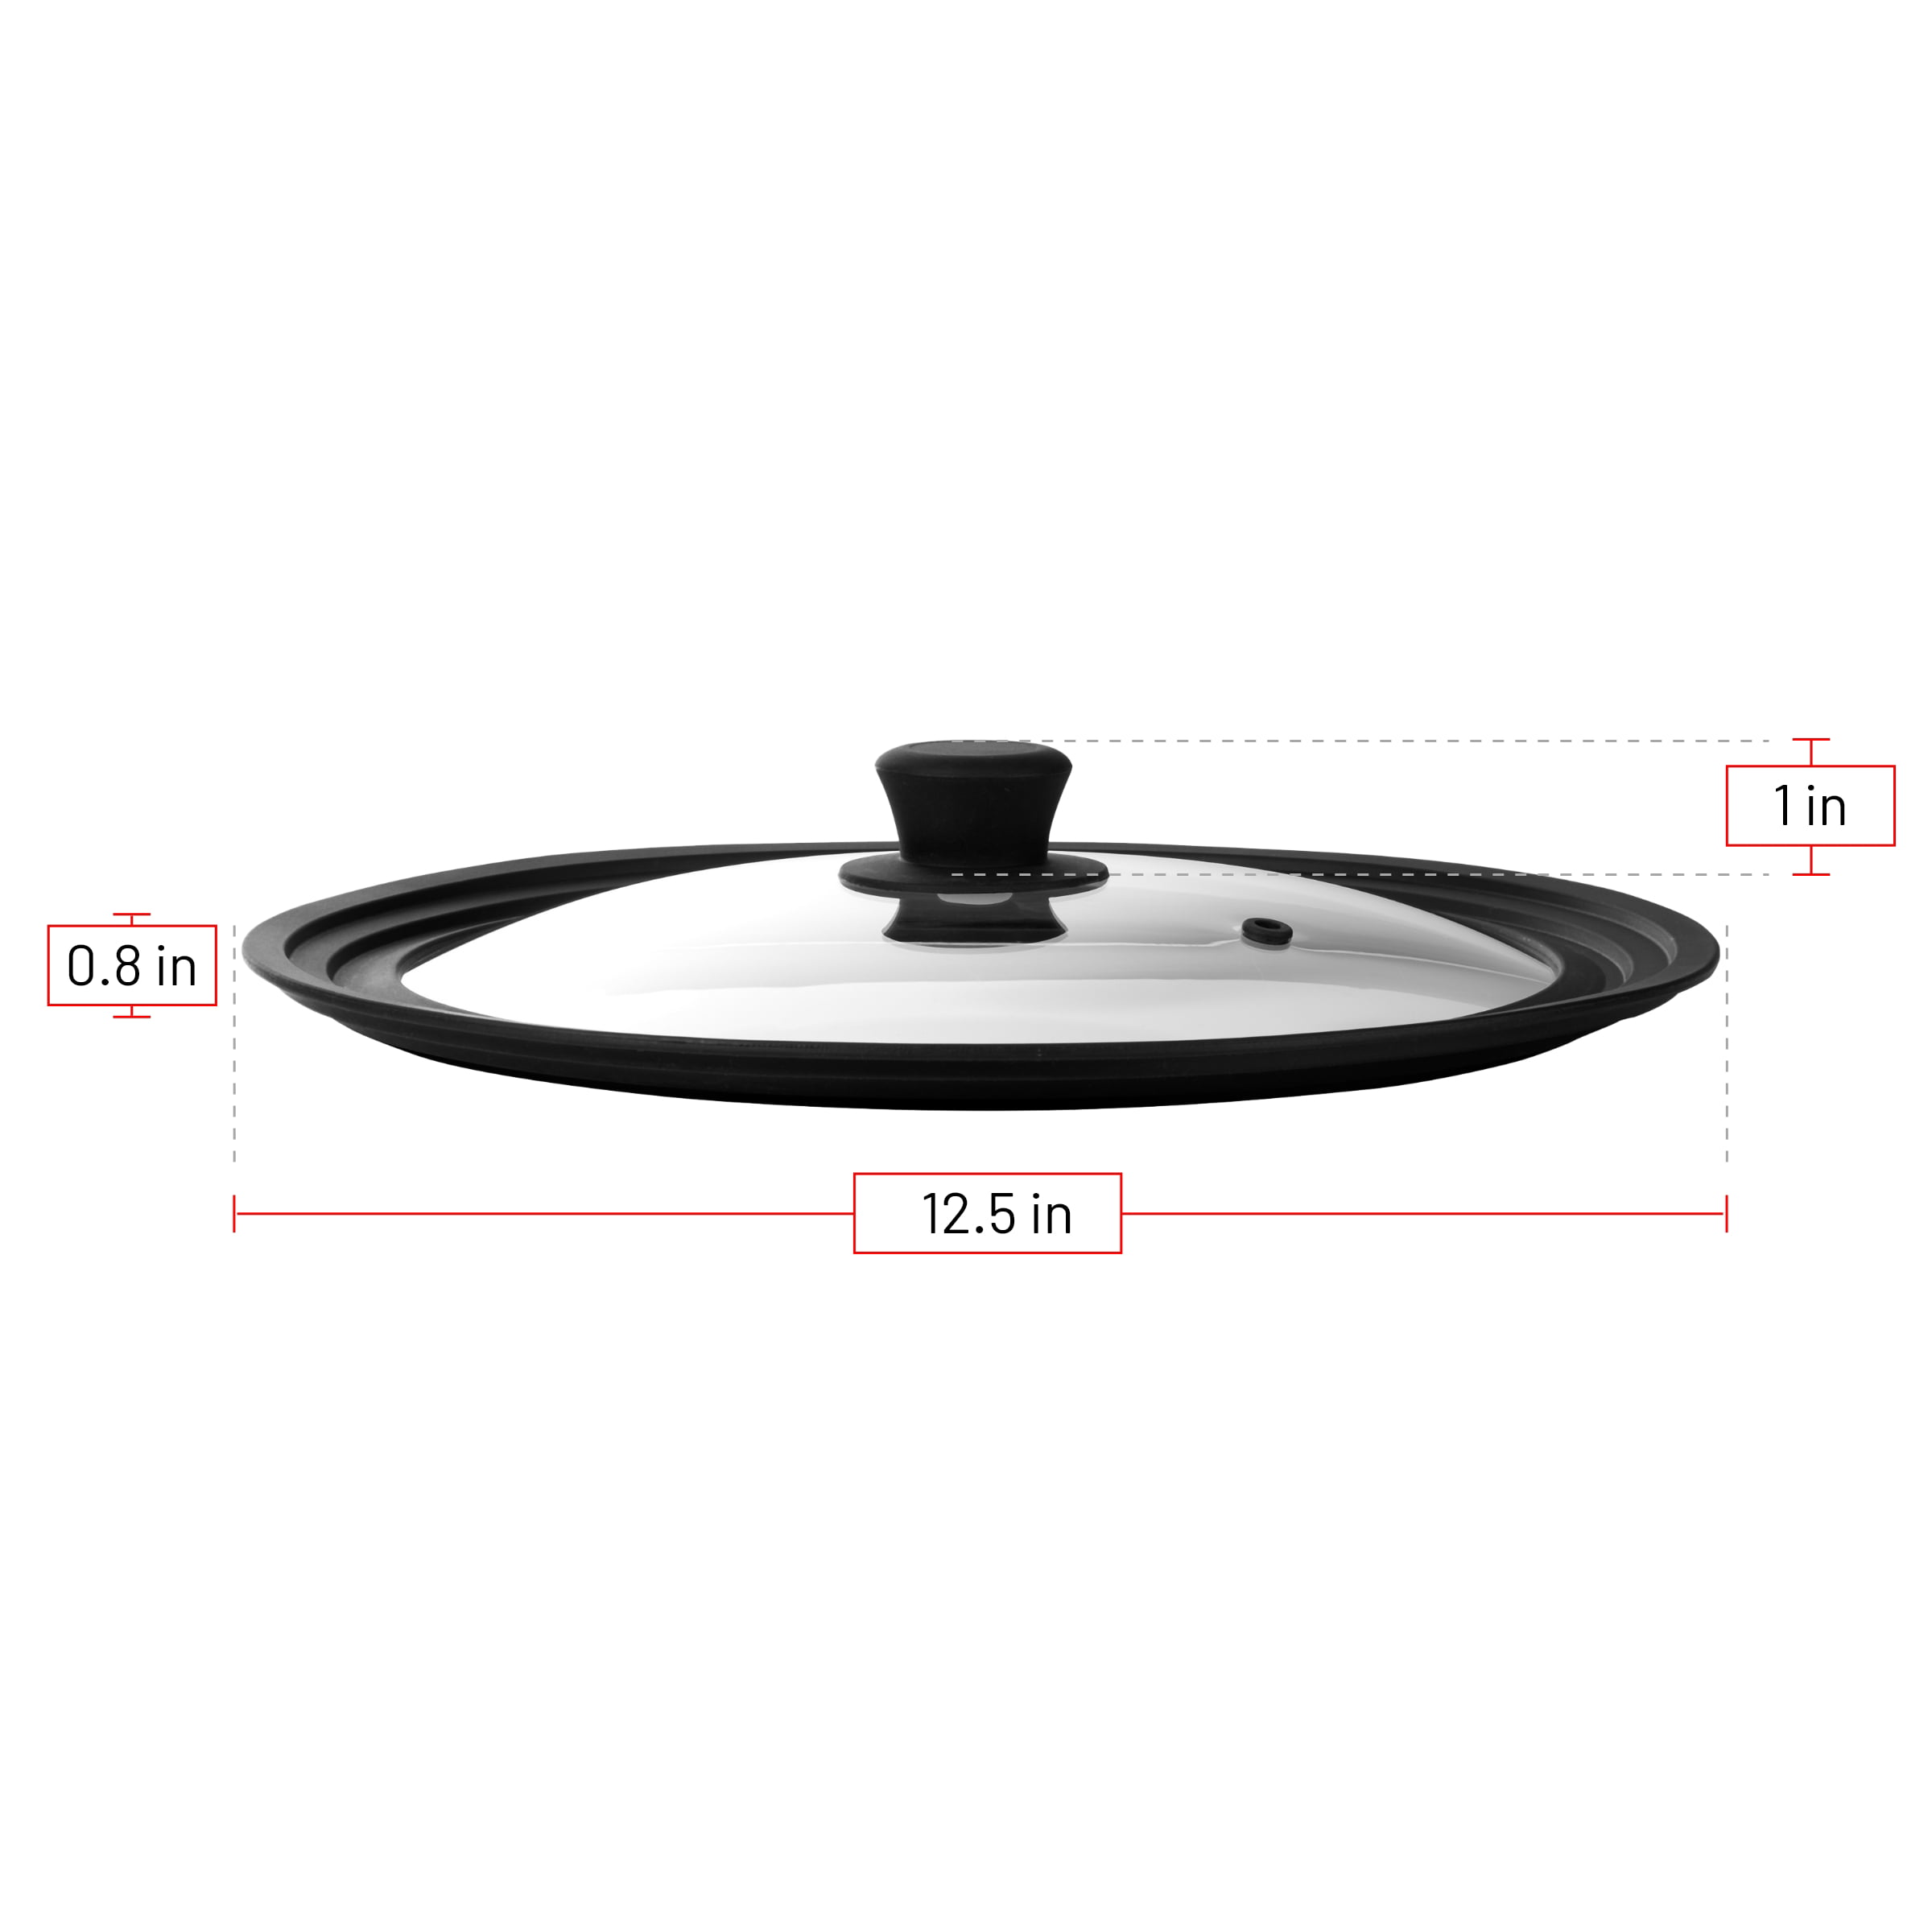 Glass Lid for Frying Pan, Fry Pan, Skillet, Pan Lid with Handle Coated in Silicone Ring,12 Inch/30cm, Clear, Silver